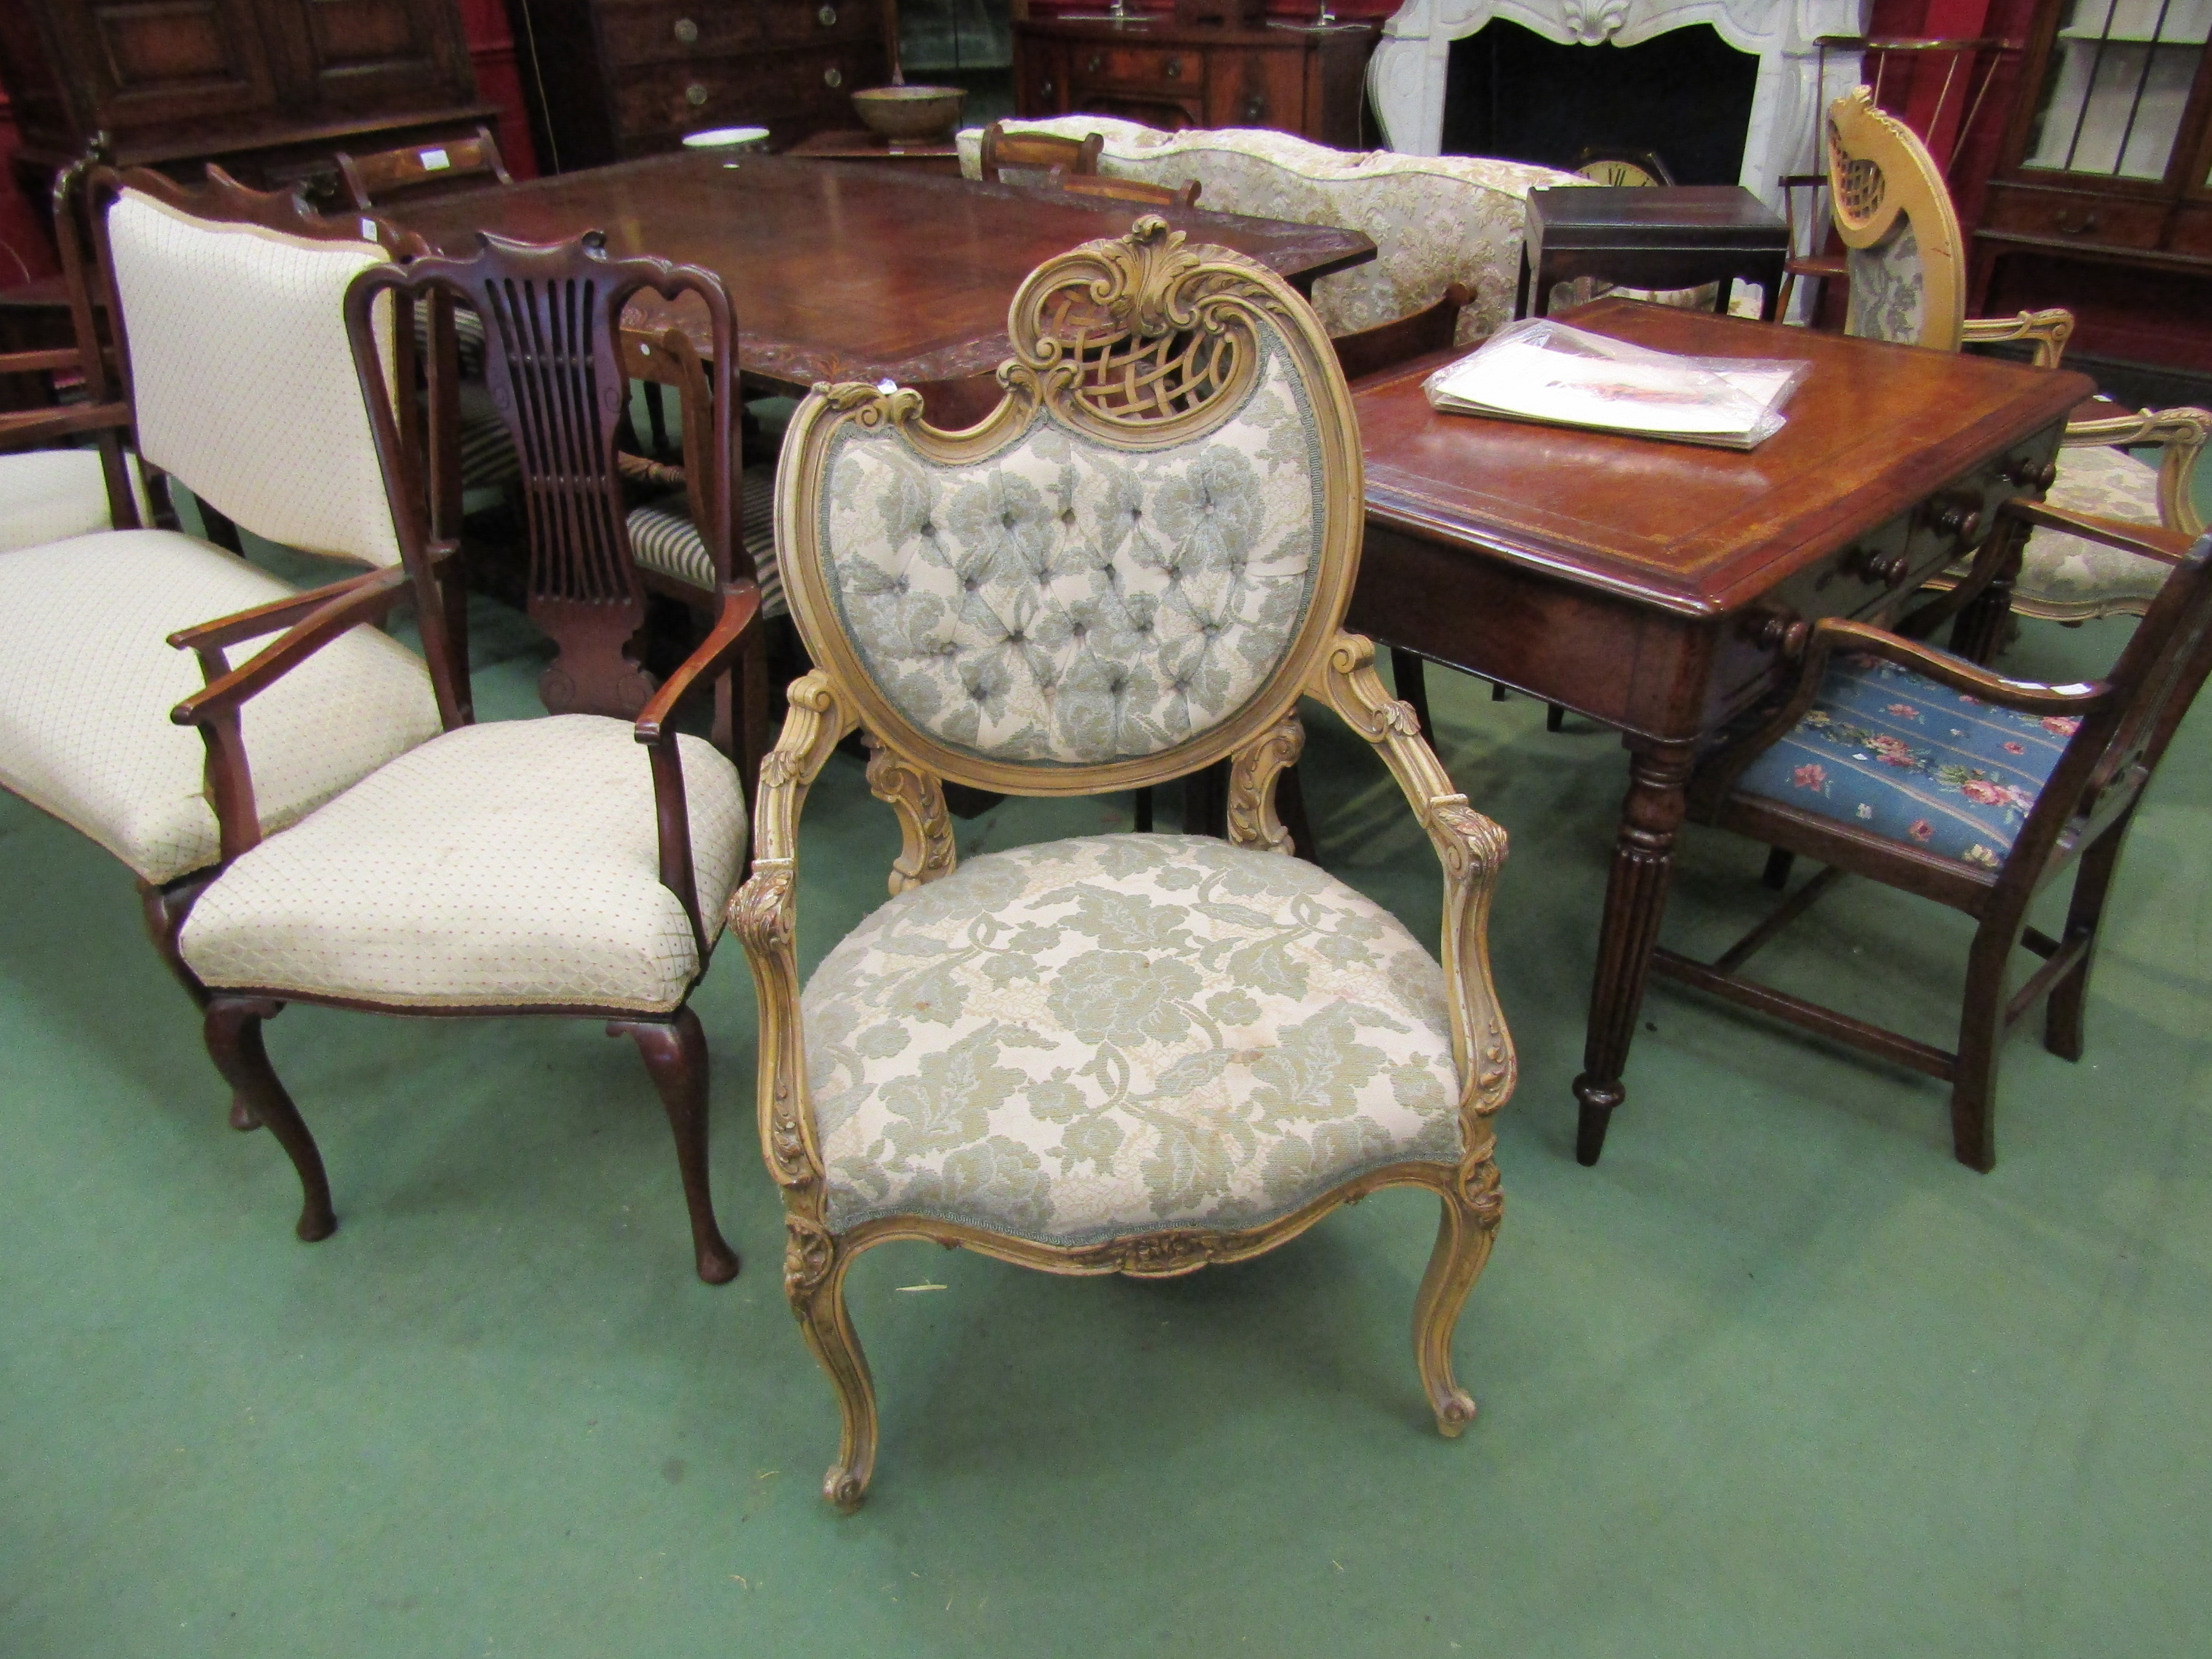 A pair of Rococo style decorative elbow chairs with floral upholstery